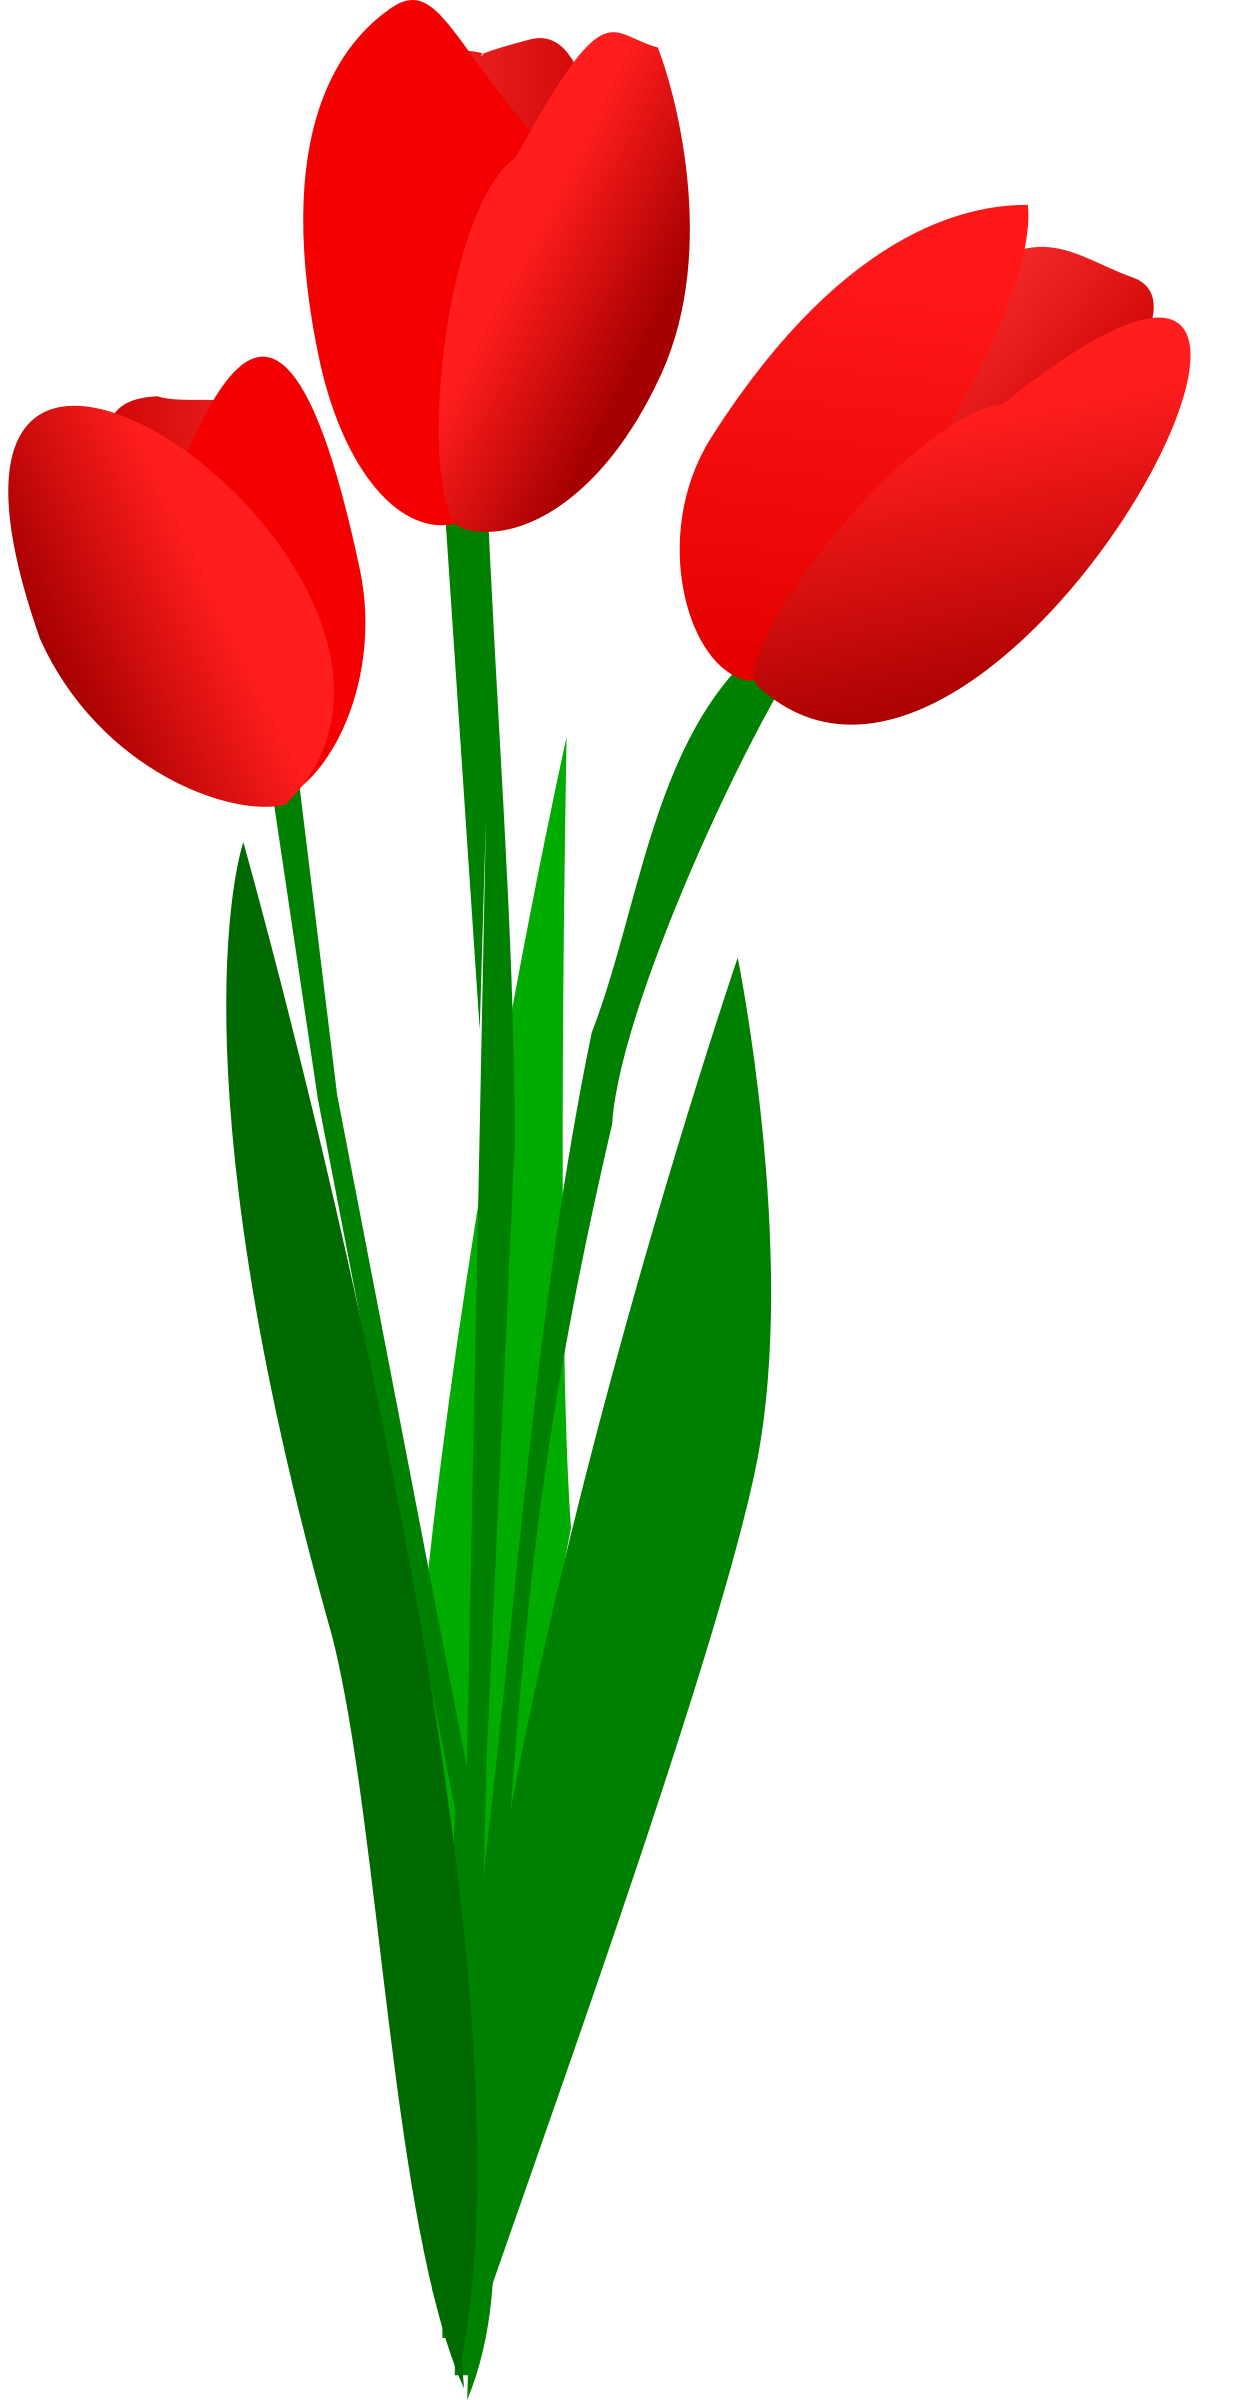 Outline clipart tulip. Three red tulips hoa